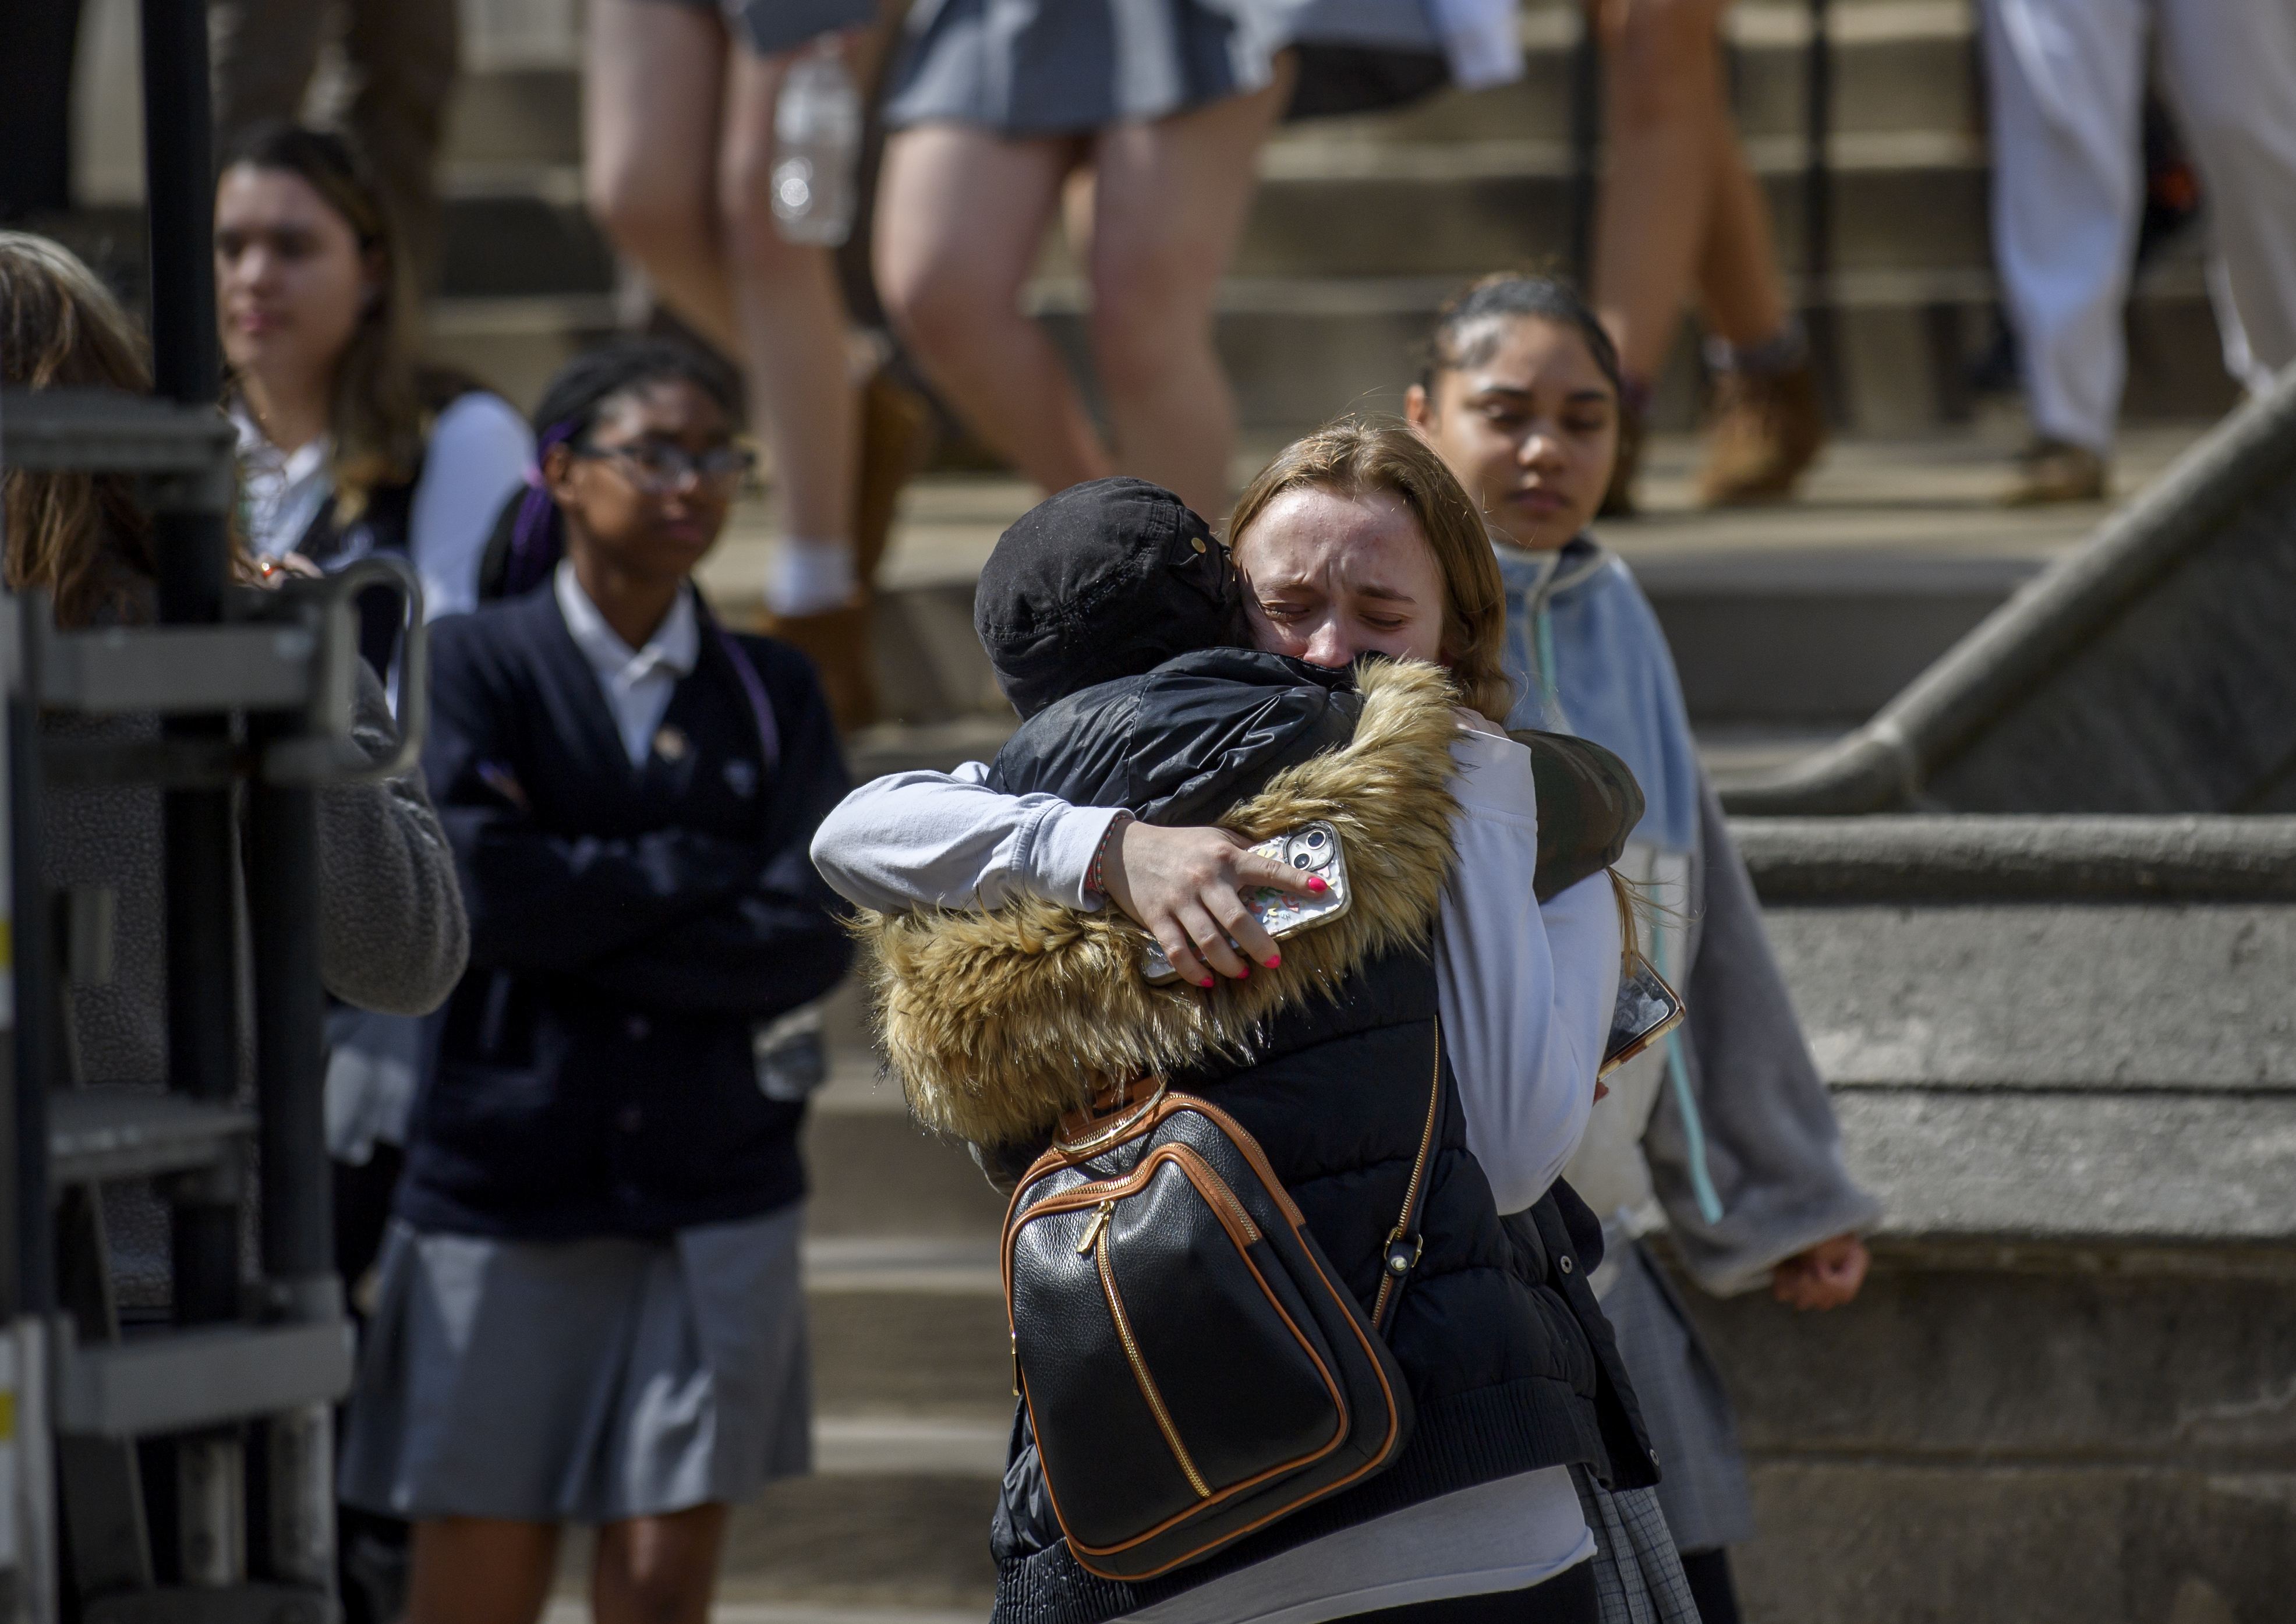 A student from Oakland Catholic High School receives comfort following the evacuation of her school after a hoax call about an active shooter on March 29 in Pittsburgh, Pennsylvania. (Jeff Swensen—Getty Images)